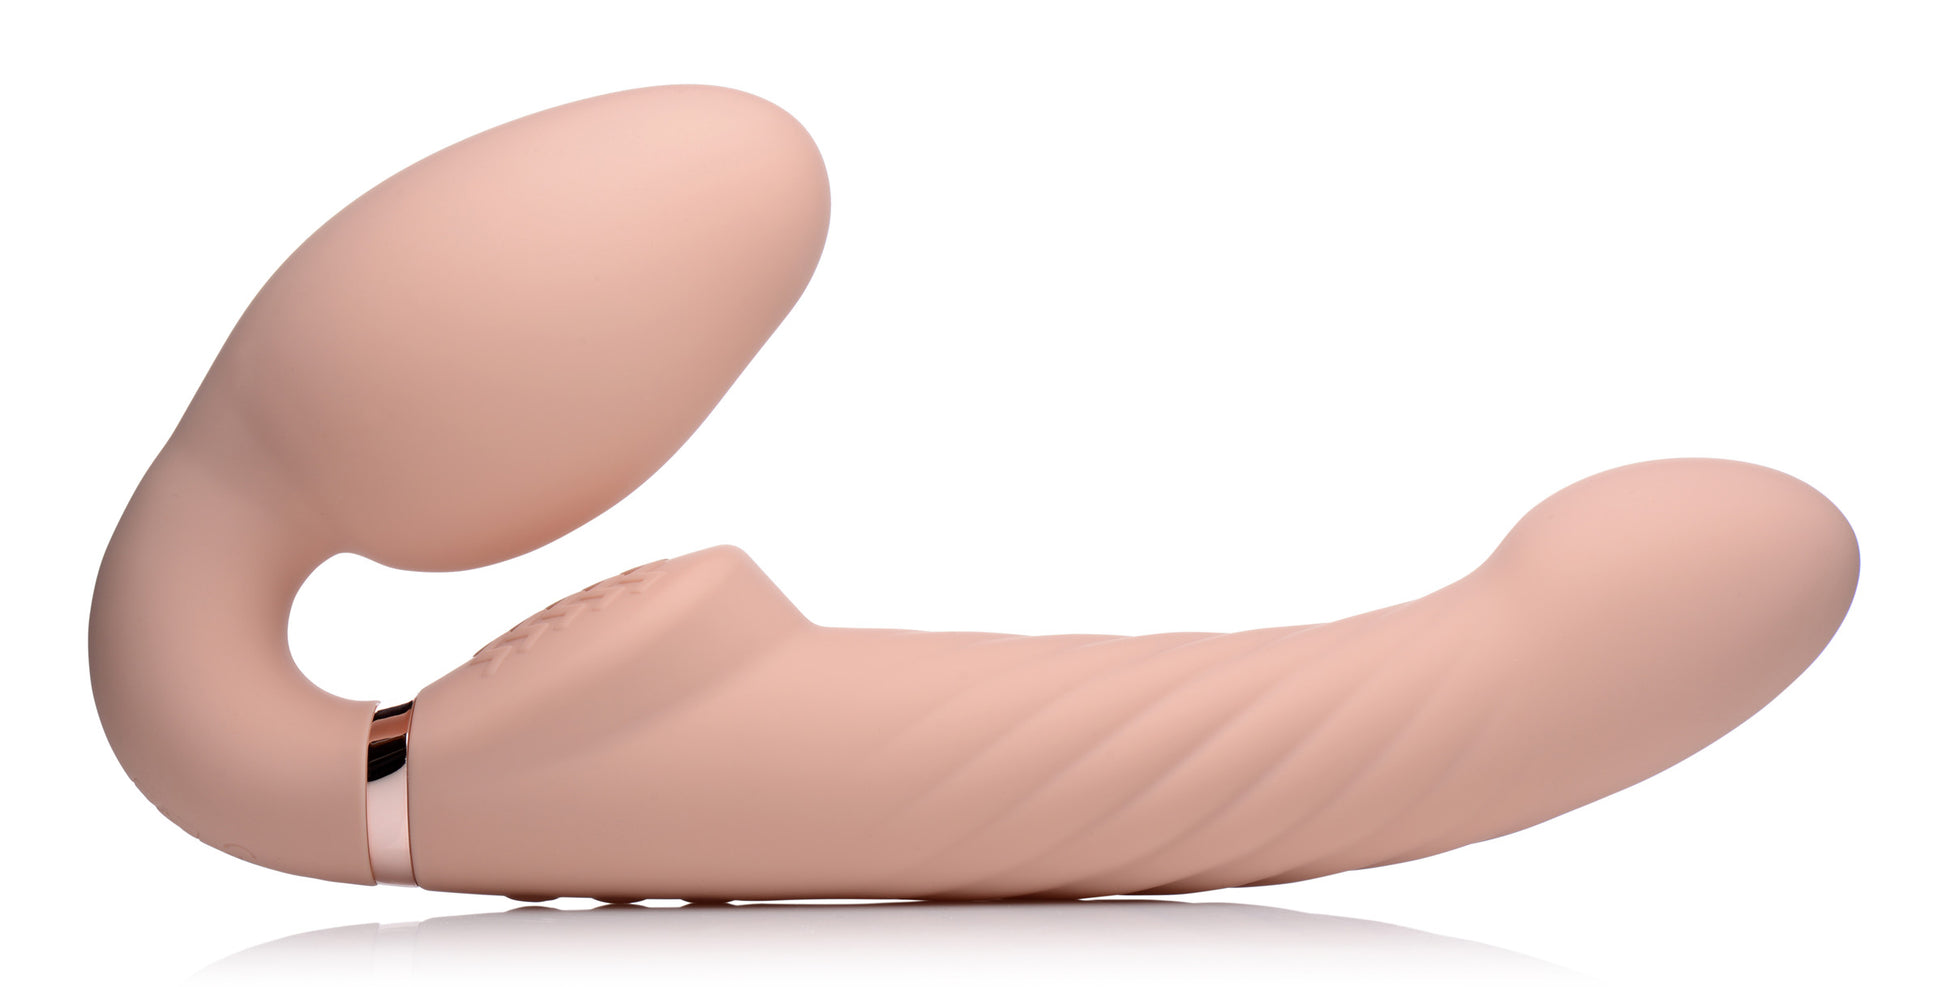 Ergo-Fit Twist Inflatable Vibrating Silicone Strapless Strap-on - Beige - UABDSM